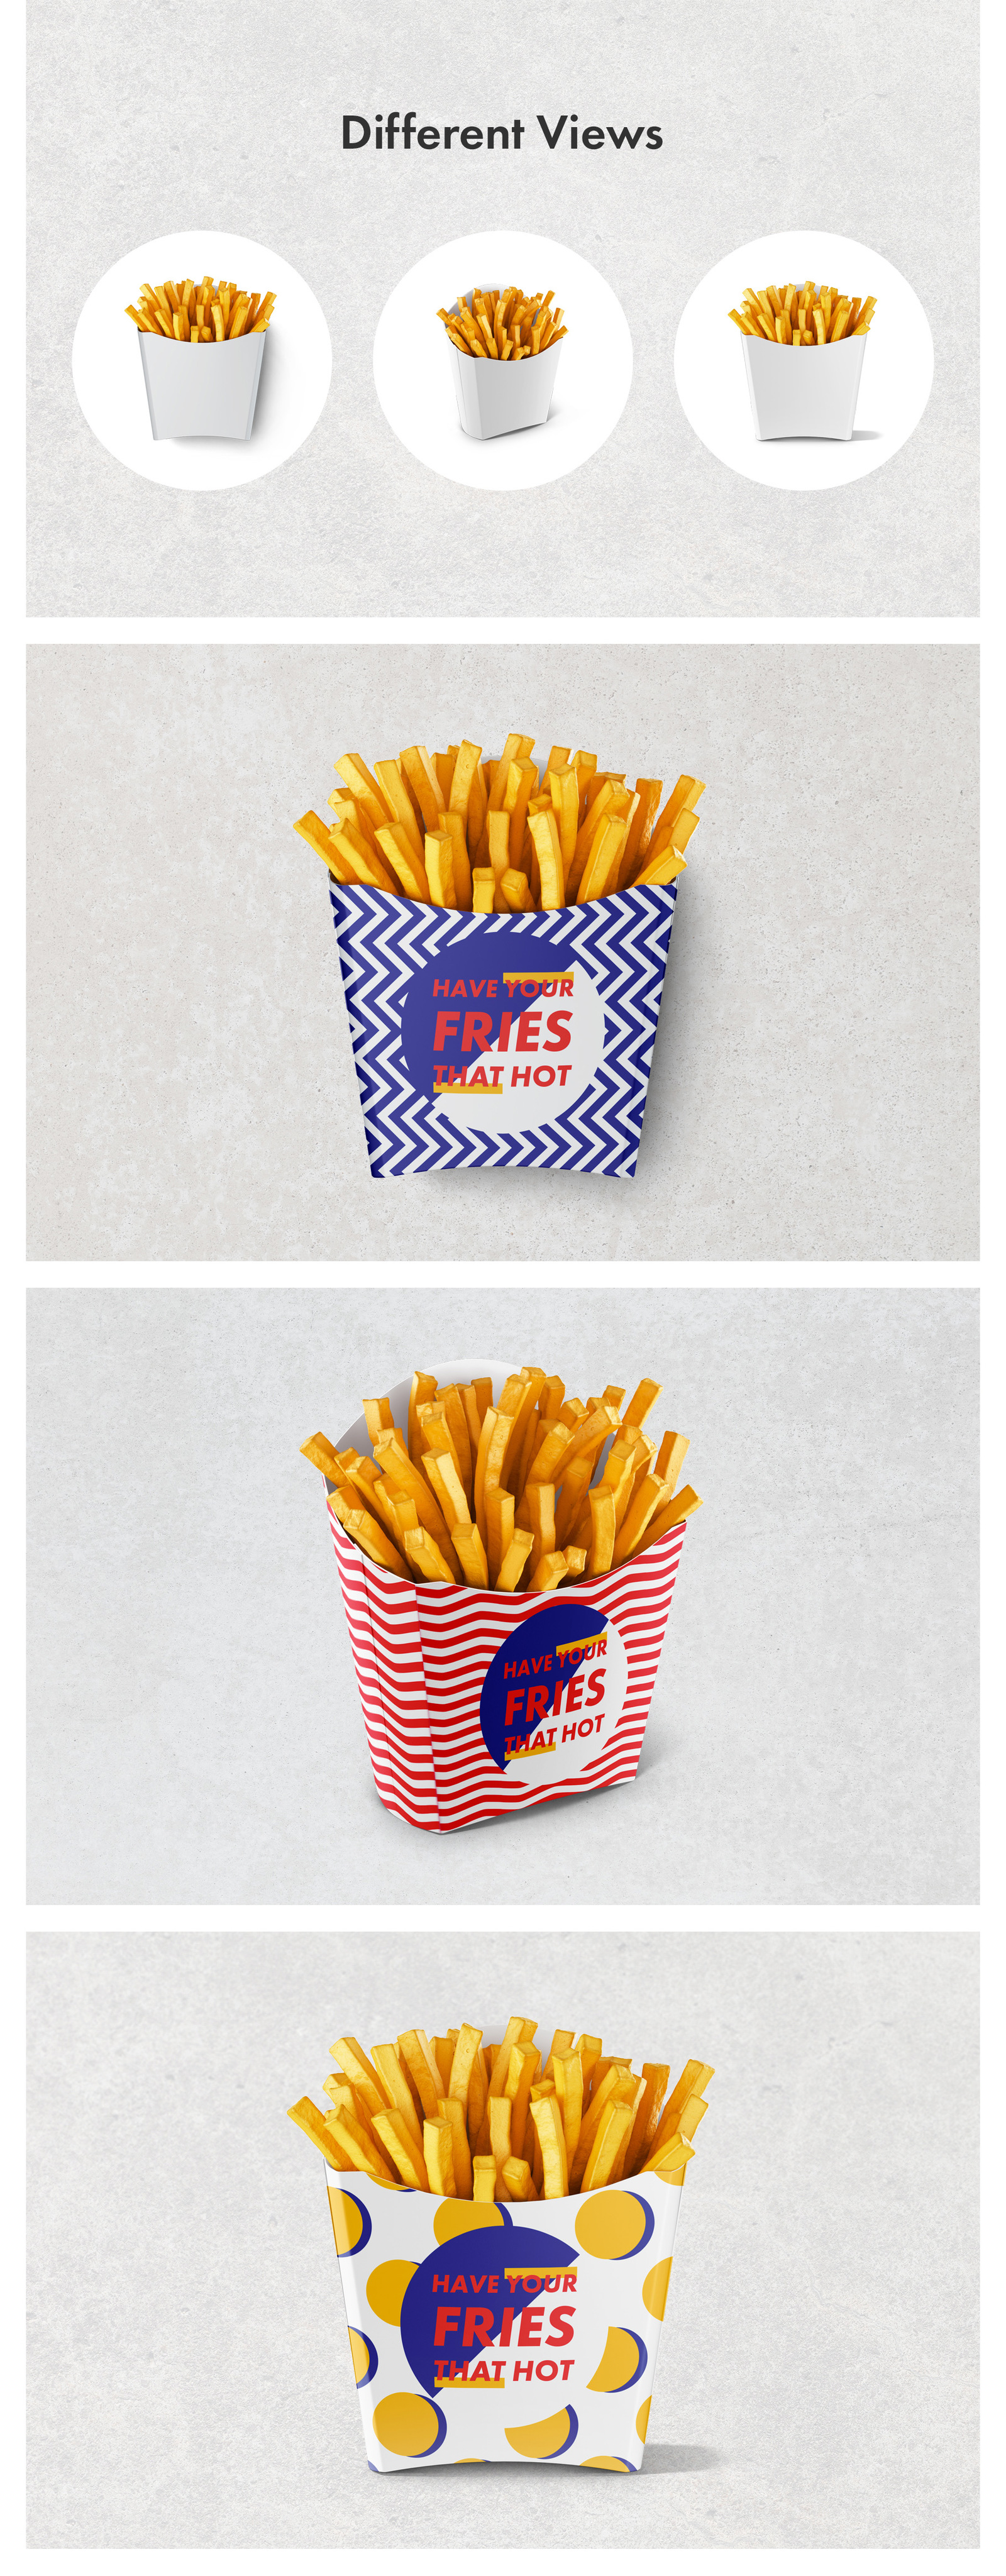 Download French Fries Packaging Mockup Set in Packaging Mockups on Yellow Images Creative Store